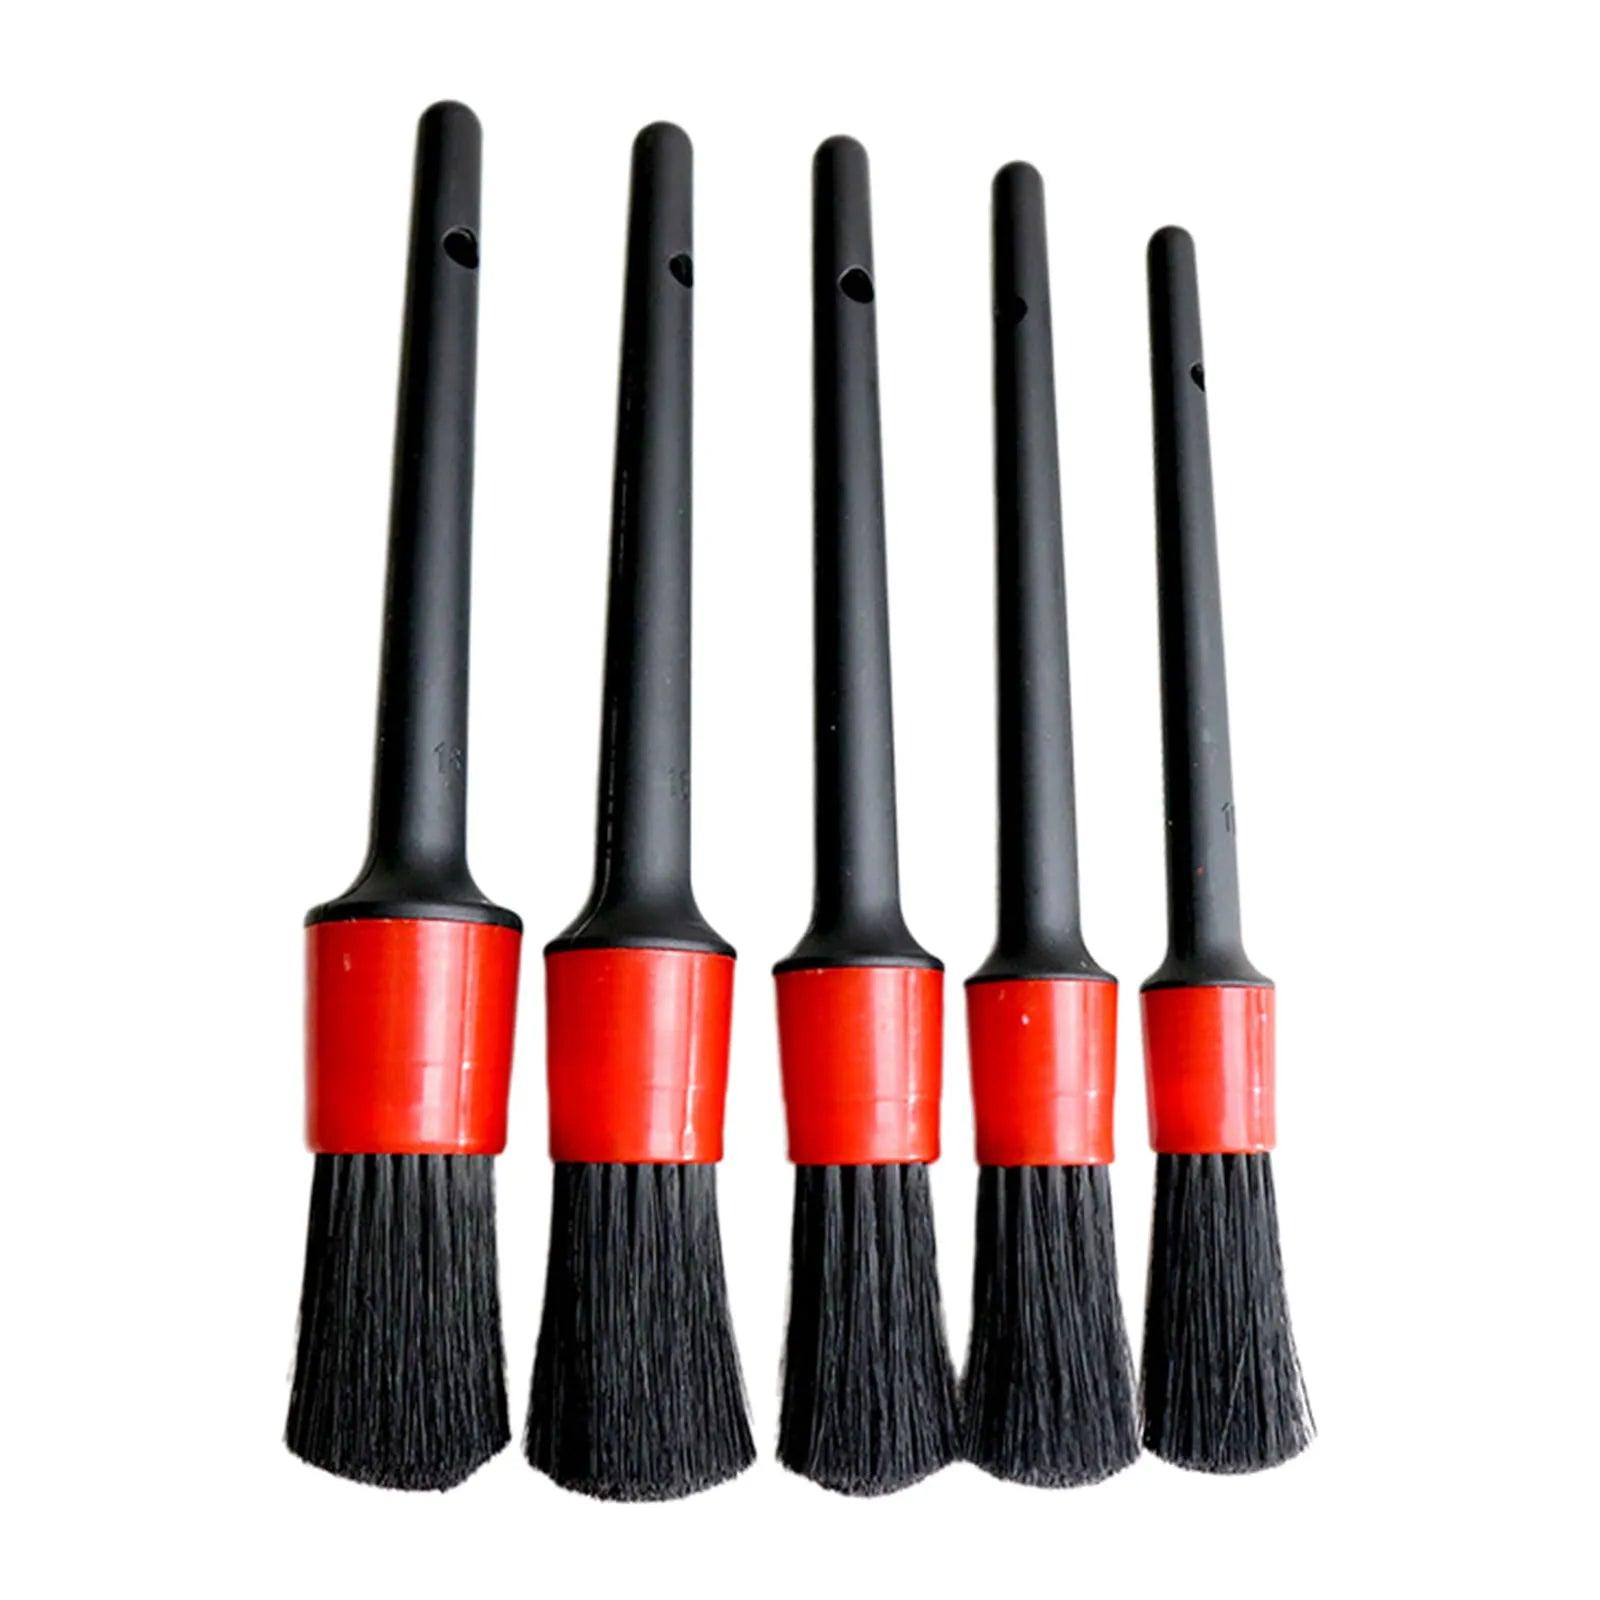 Automotive Interior Detailing Brush Set - 5 Piece Car Cleaning Tool Kit for Wheels, Rims, and More  ourlum.com   